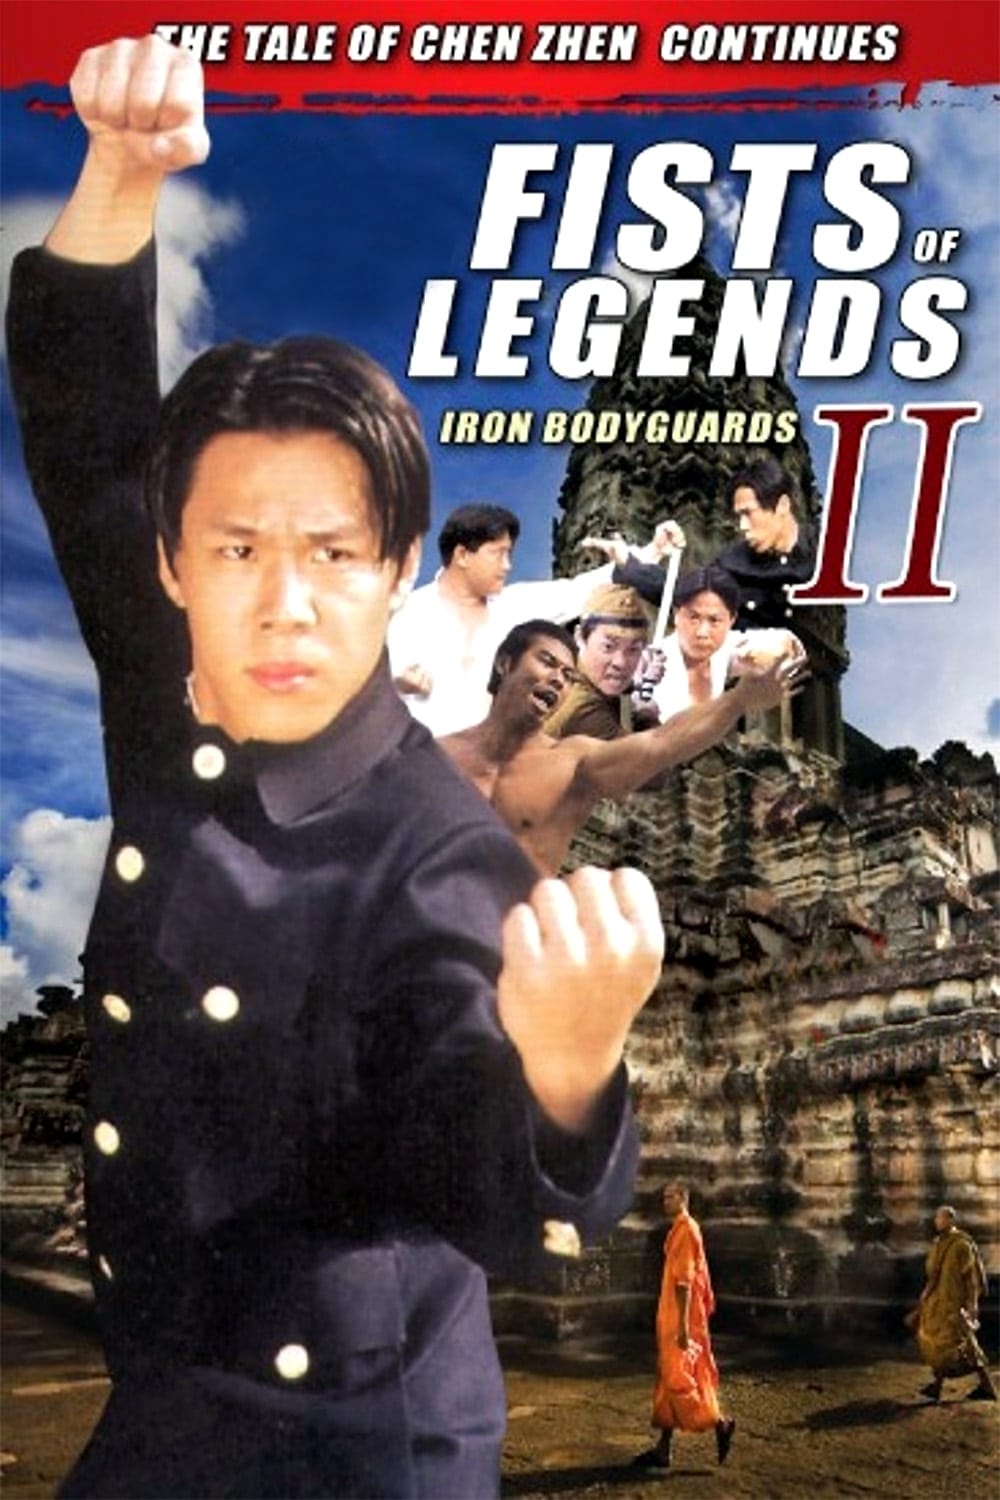 Fists of Legends 2: Iron Bodyguards